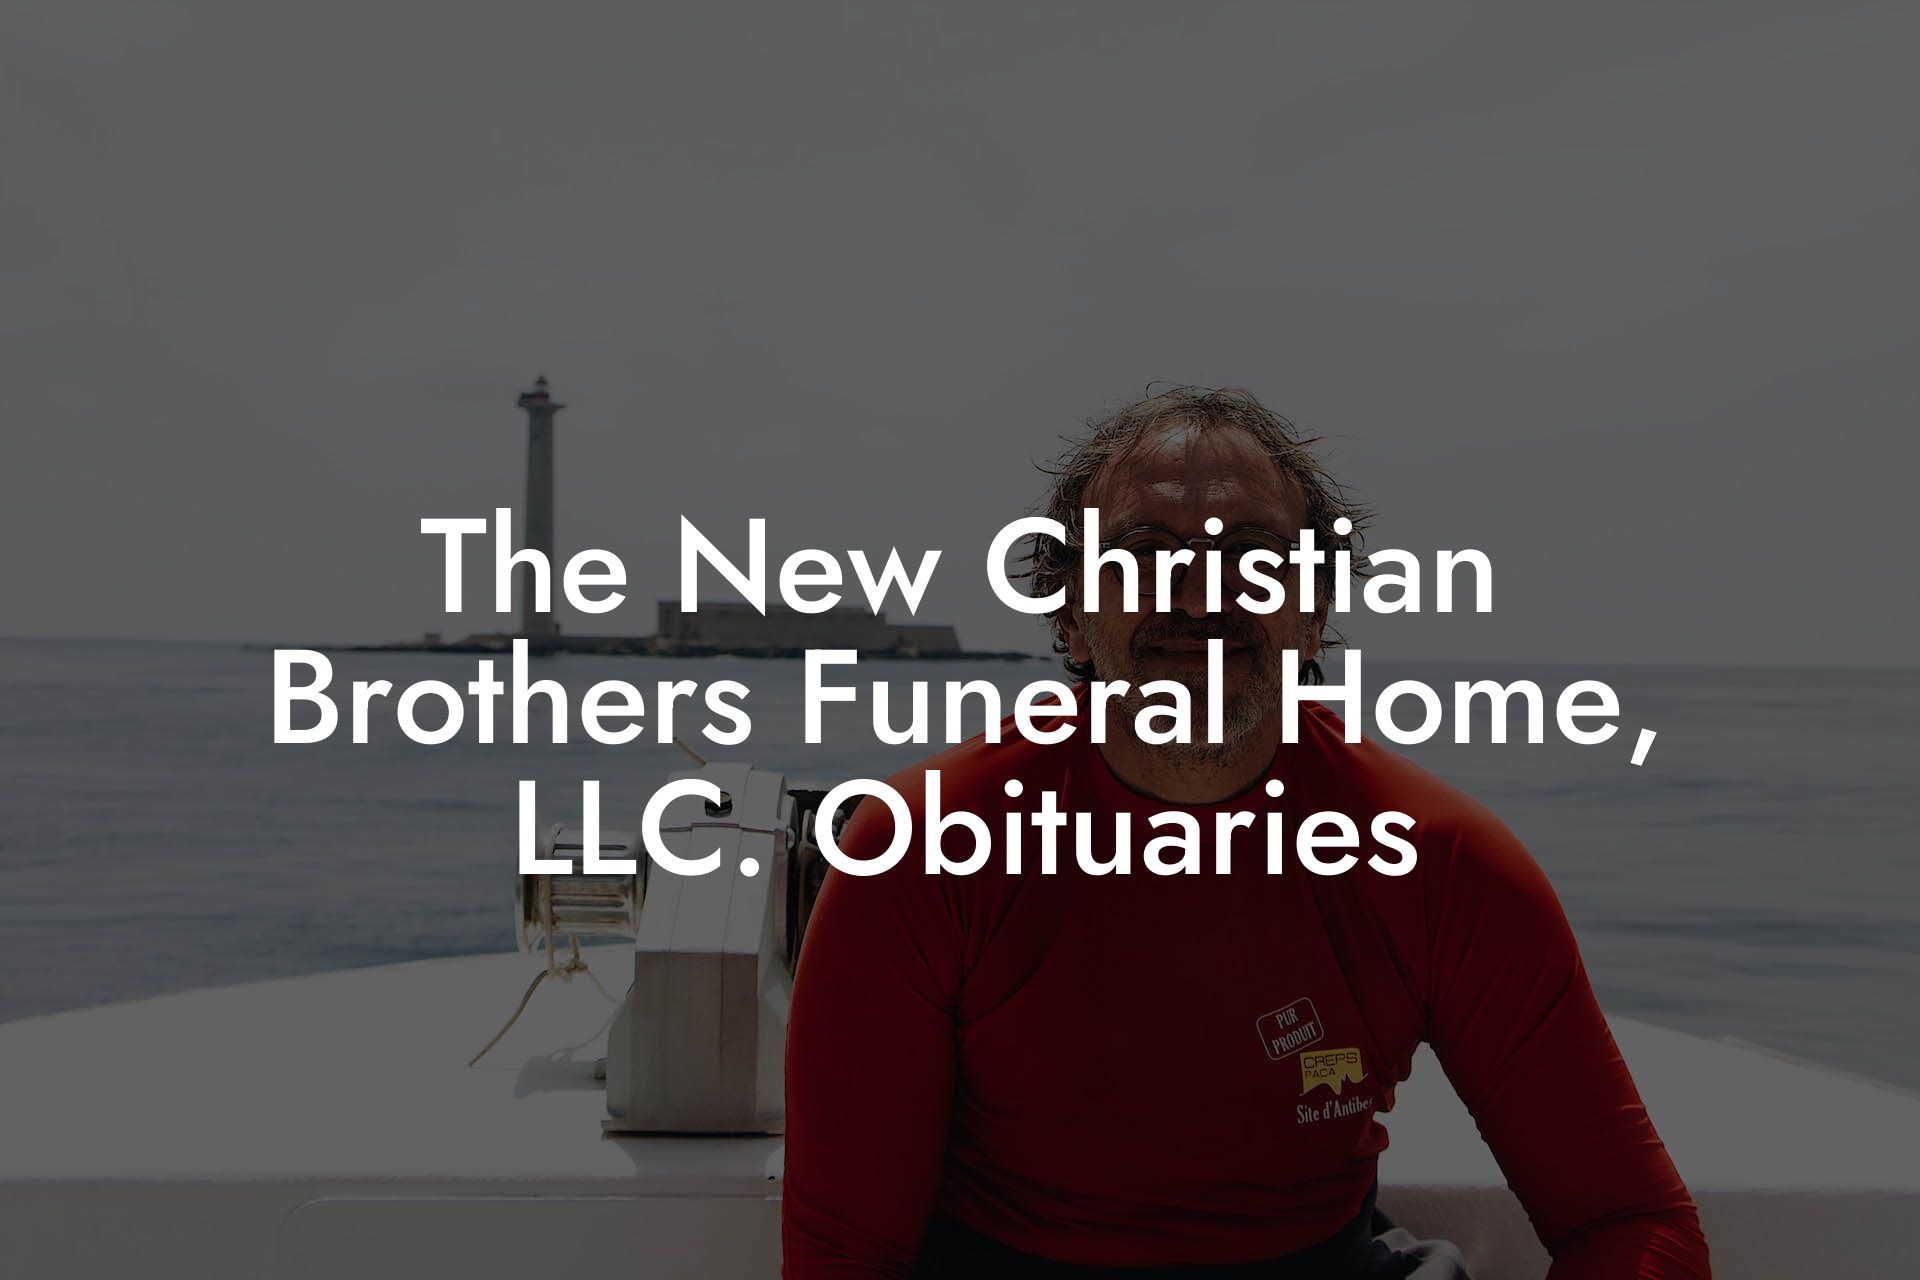 The New Christian Brothers Funeral Home, LLC. Obituaries